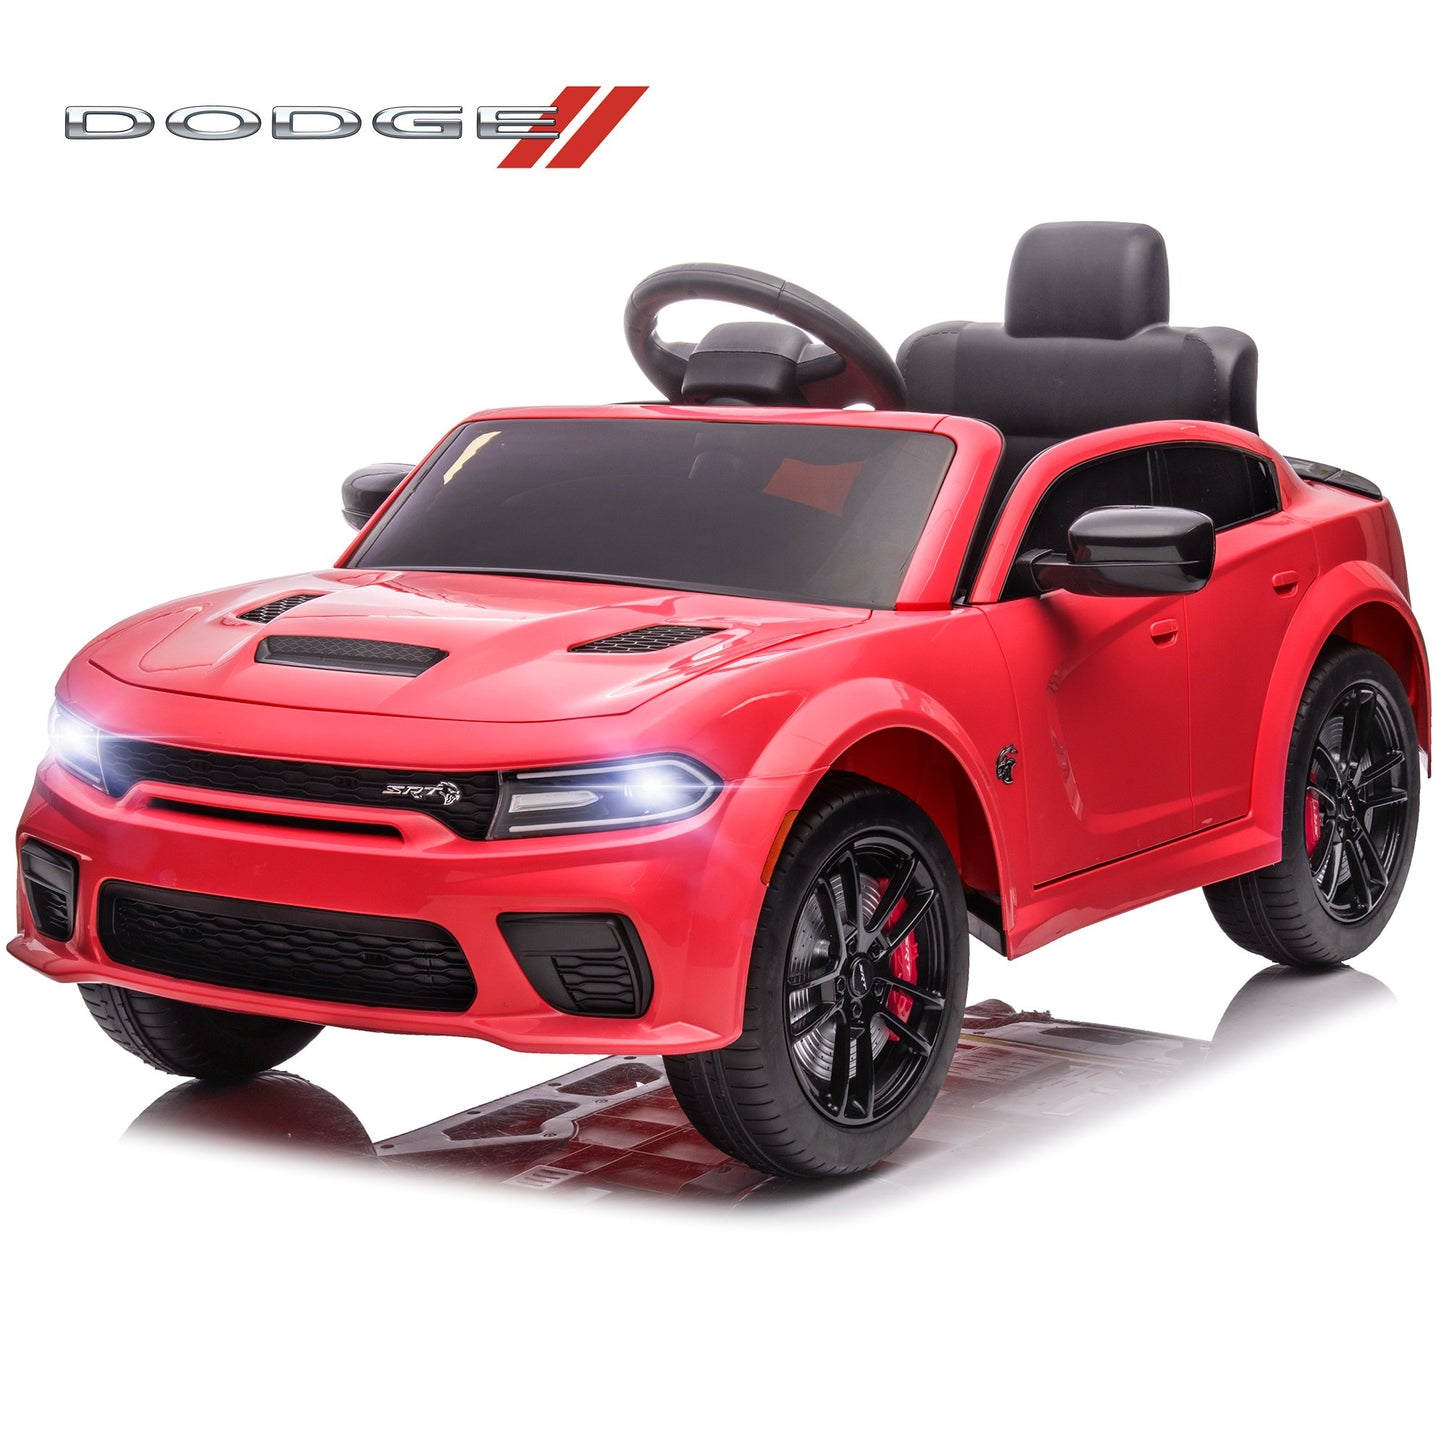 iRerts Dodge 12 V Battery Powered Ride on Police Cars with Remote Control, Kids Boys Girls Electric Vehicles Ride-on Toys with Bluetooth, LED Lights, White